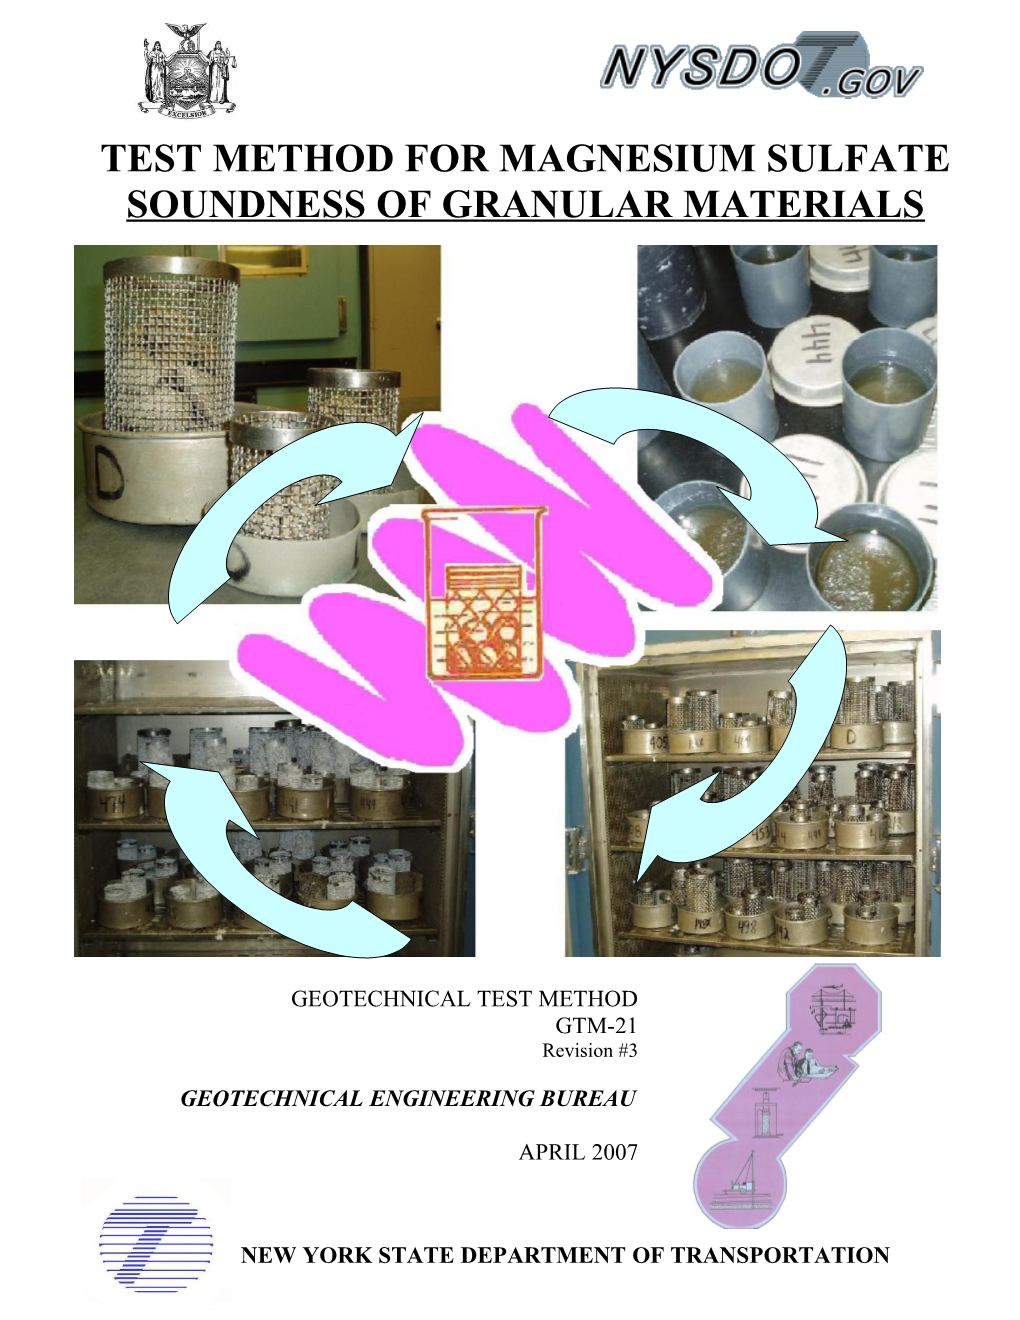 Test Method for Magnesium Sulfate Soundness of Granular Materials